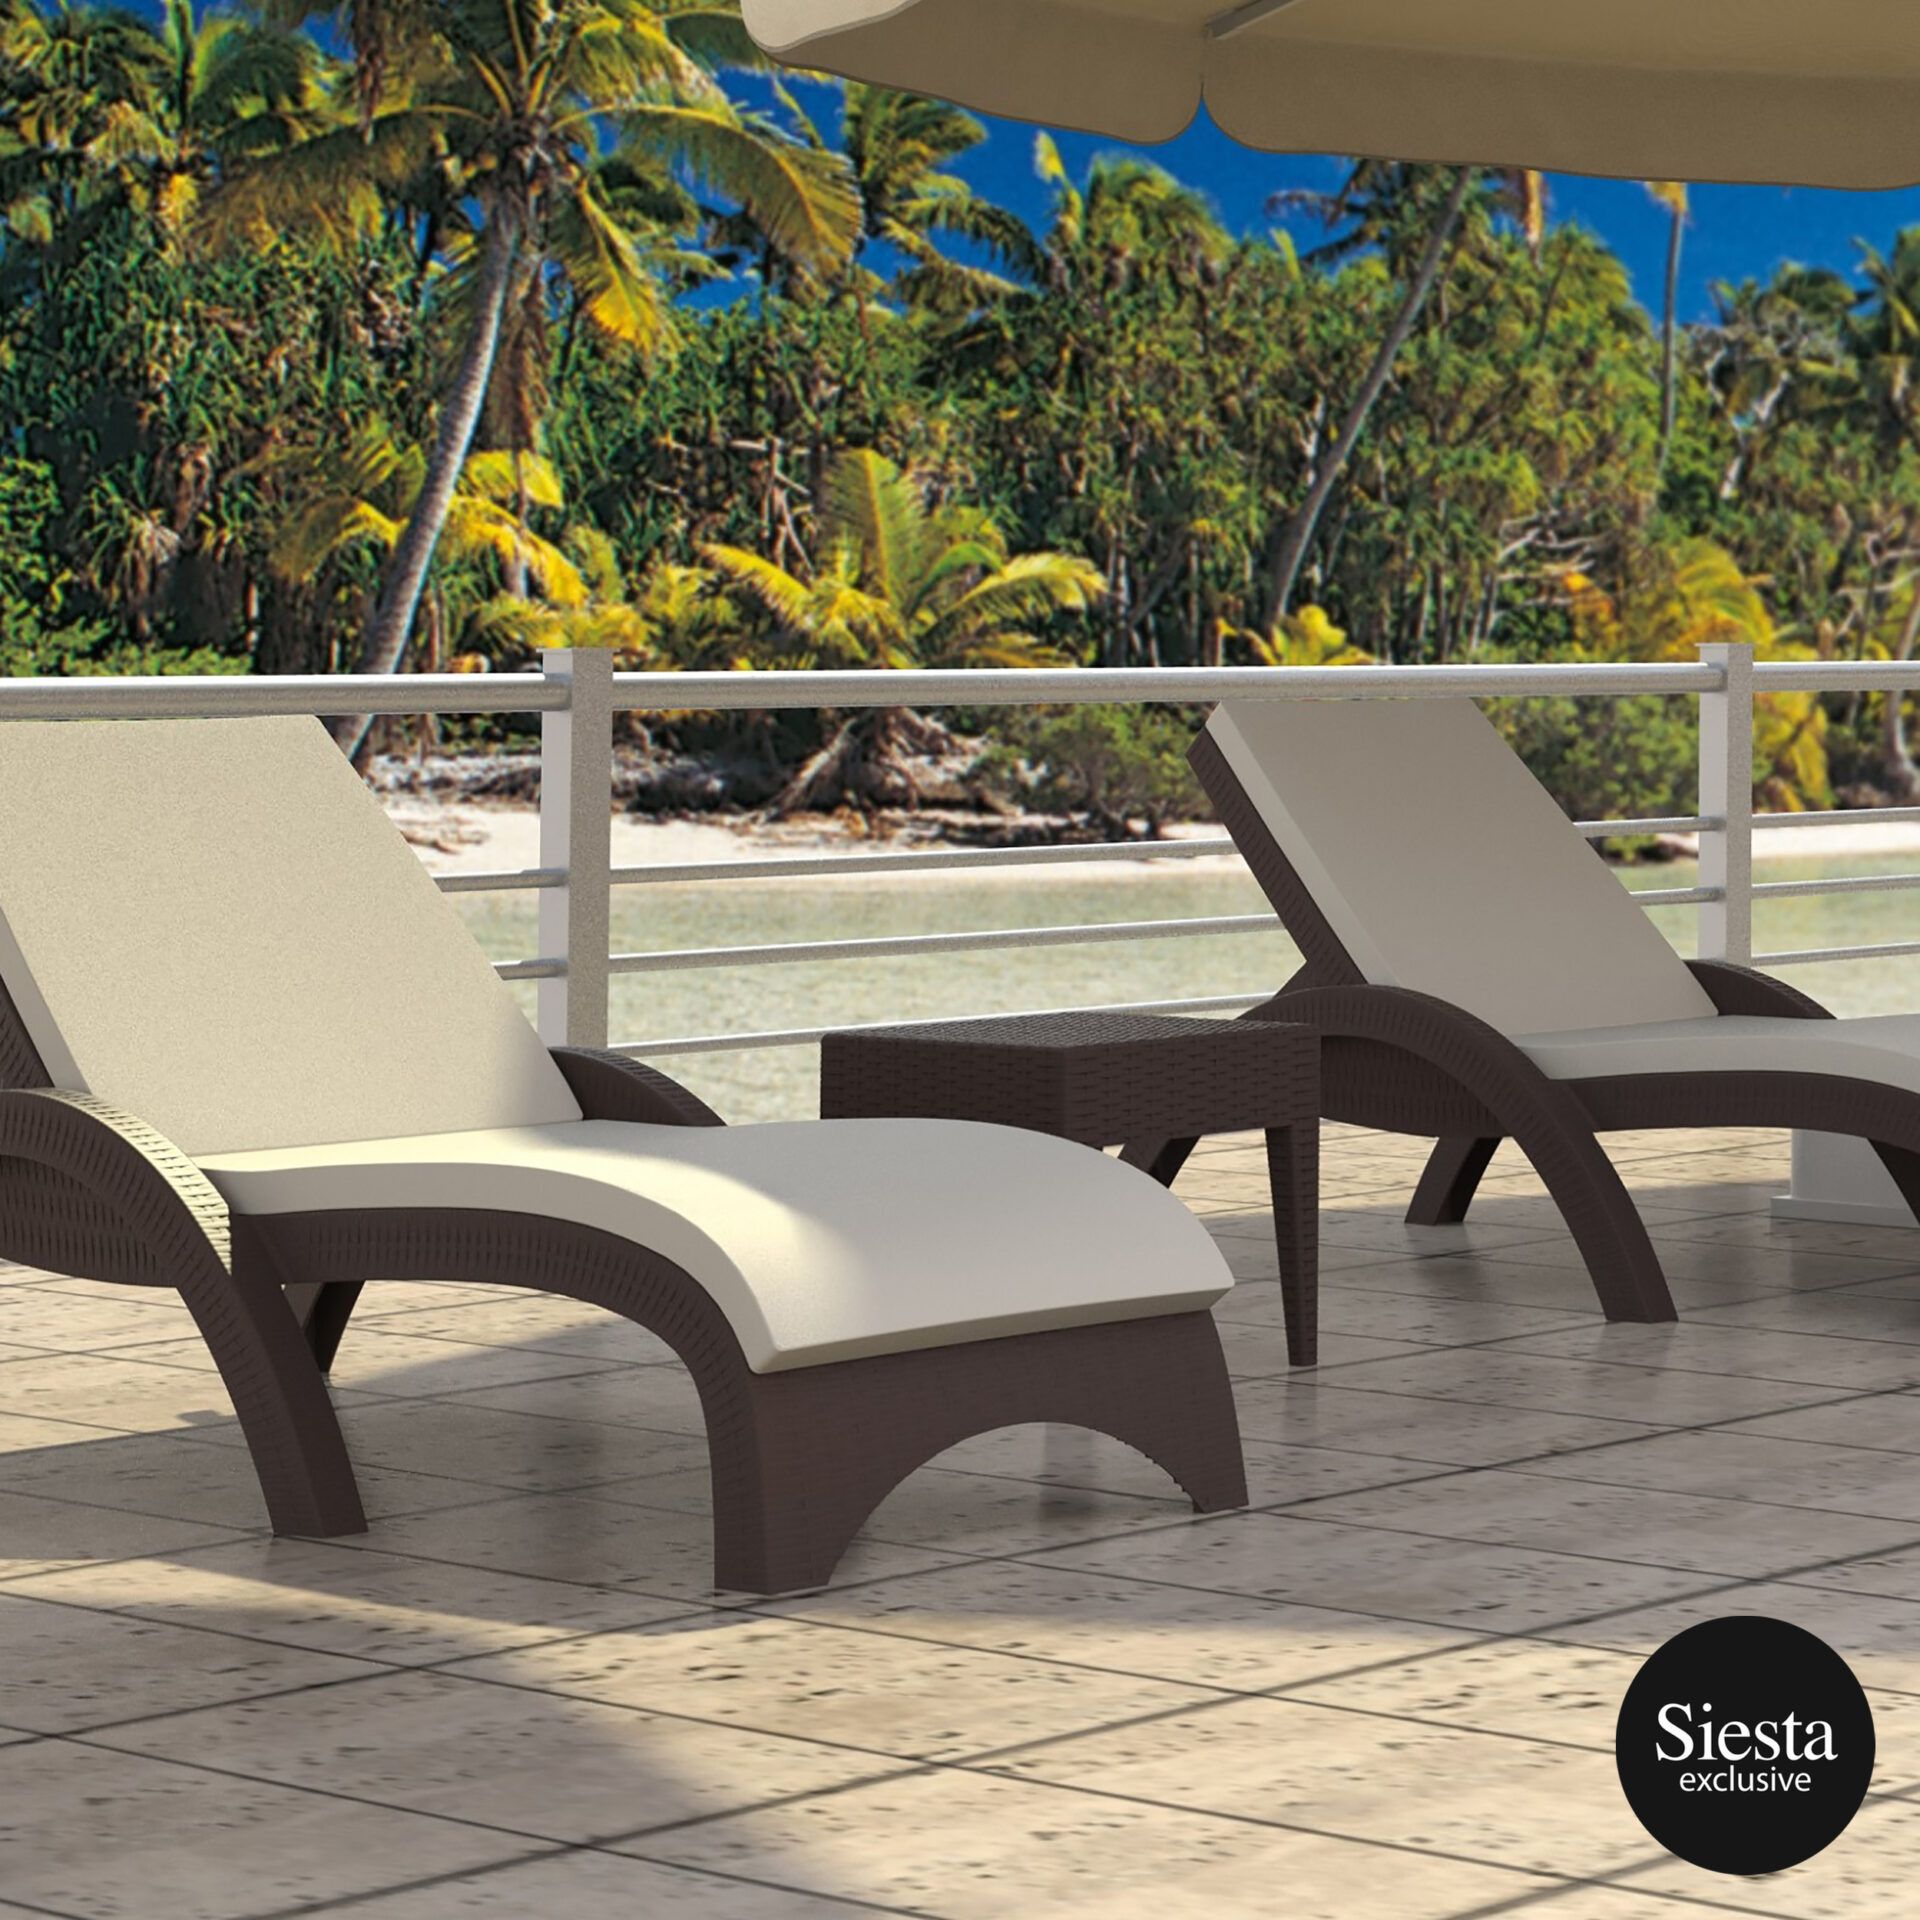 Fiji Sunlounger/Tequila Side Table 3 Pc Package - Anthracite With Beige Cushion